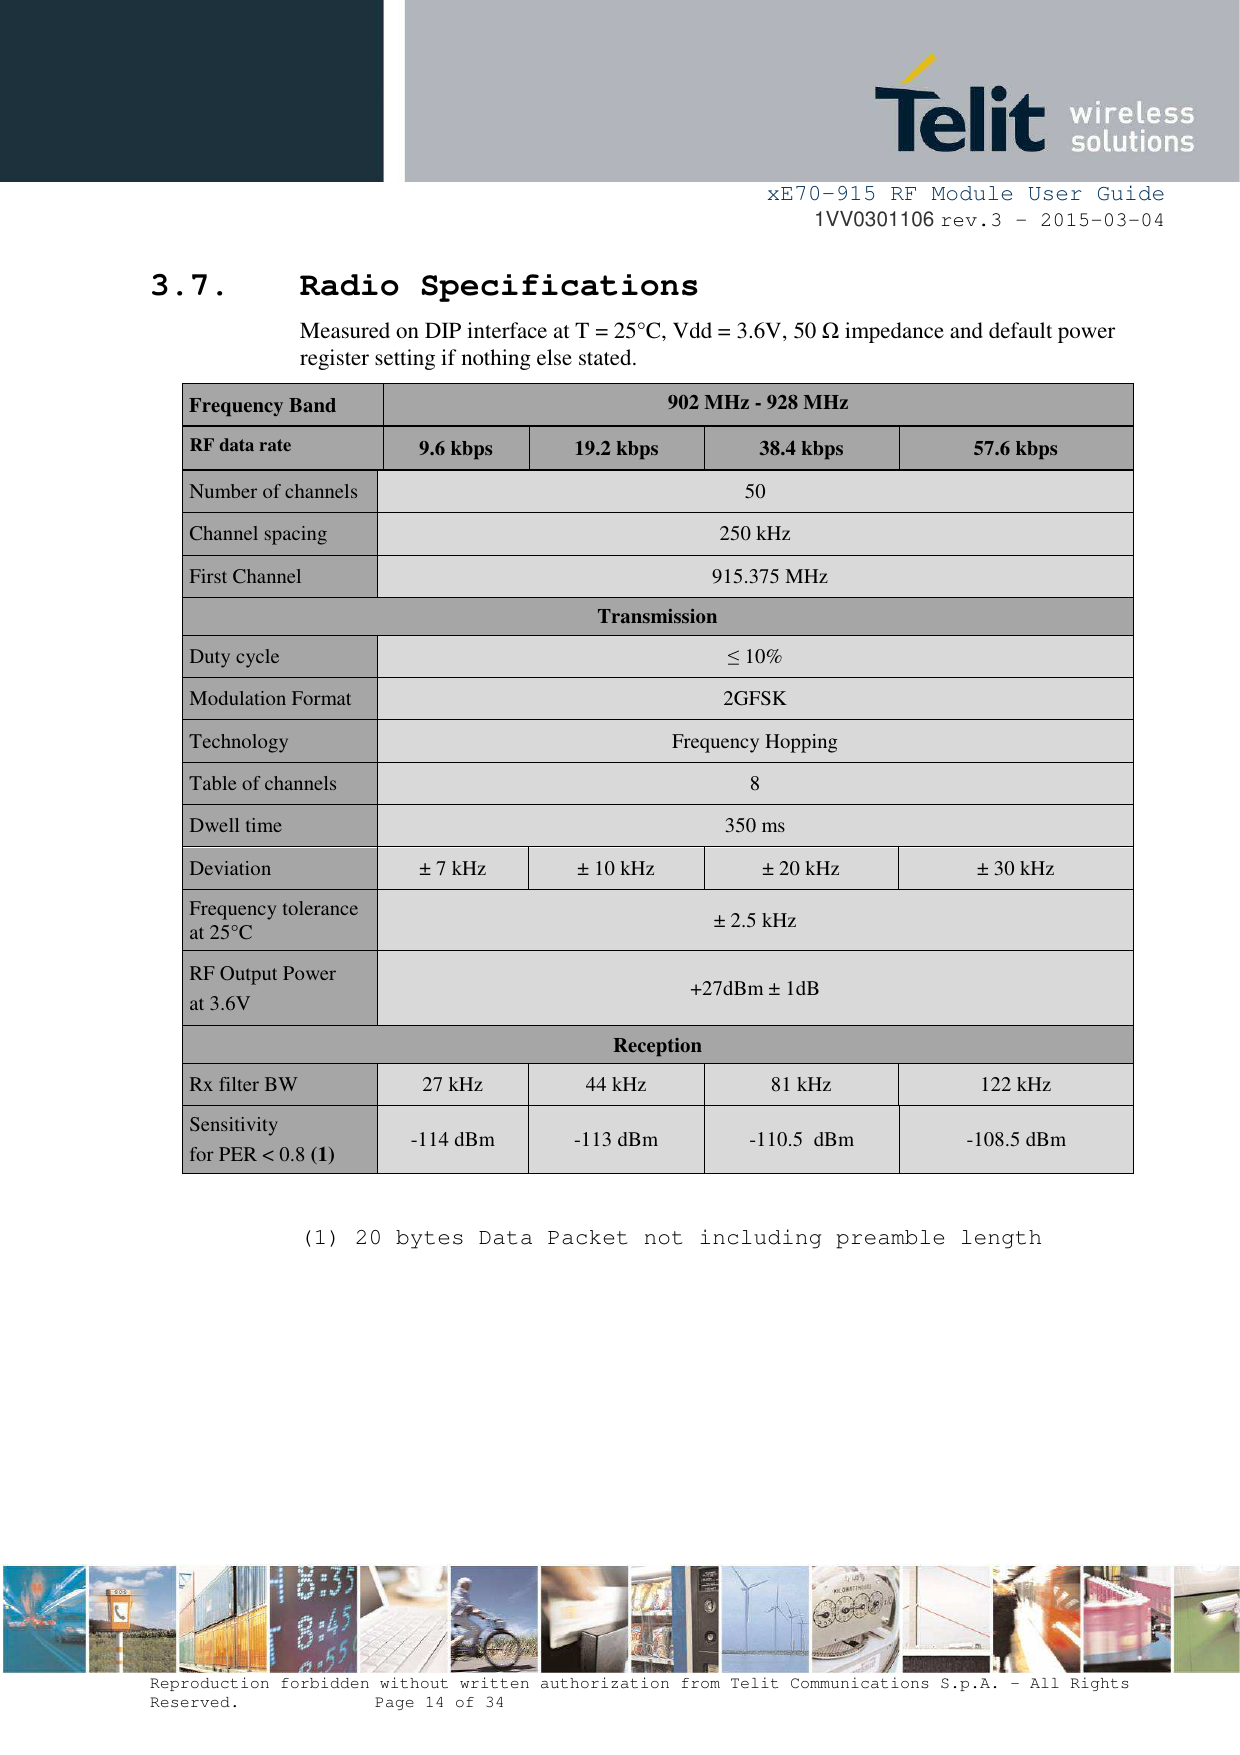     xE70-915 RF Module User Guide 1VV0301106 rev.3 – 2015-03-04  Reproduction forbidden without written authorization from Telit Communications S.p.A. - All Rights Reserved.    Page 14 of 34  3.7. Radio Specifications Measured on DIP interface at T = 25°C, Vdd = 3.6V, 50 Ω impedance and default power register setting if nothing else stated. Frequency Band  902 MHz - 928 MHz RF data rate 9.6 kbps  19.2 kbps  38.4 kbps  57.6 kbps Number of channels  50 Channel spacing  250 kHz First Channel    915.375 MHz Transmission Duty cycle  ≤ 10% Modulation Format  2GFSK Technology  Frequency Hopping Table of channels  8 Dwell time  350 ms Deviation  ± 7 kHz  ± 10 kHz  ± 20 kHz  ± 30 kHz Frequency tolerance at 25°C  ± 2.5 kHz RF Output Power at 3.6V  +27dBm ± 1dB Reception Rx filter BW  27 kHz  44 kHz  81 kHz  122 kHz Sensitivity for PER &lt; 0.8 (1) -114 dBm   -113 dBm  -110.5  dBm   -108.5 dBm  (1) 20 bytes Data Packet not including preamble length           